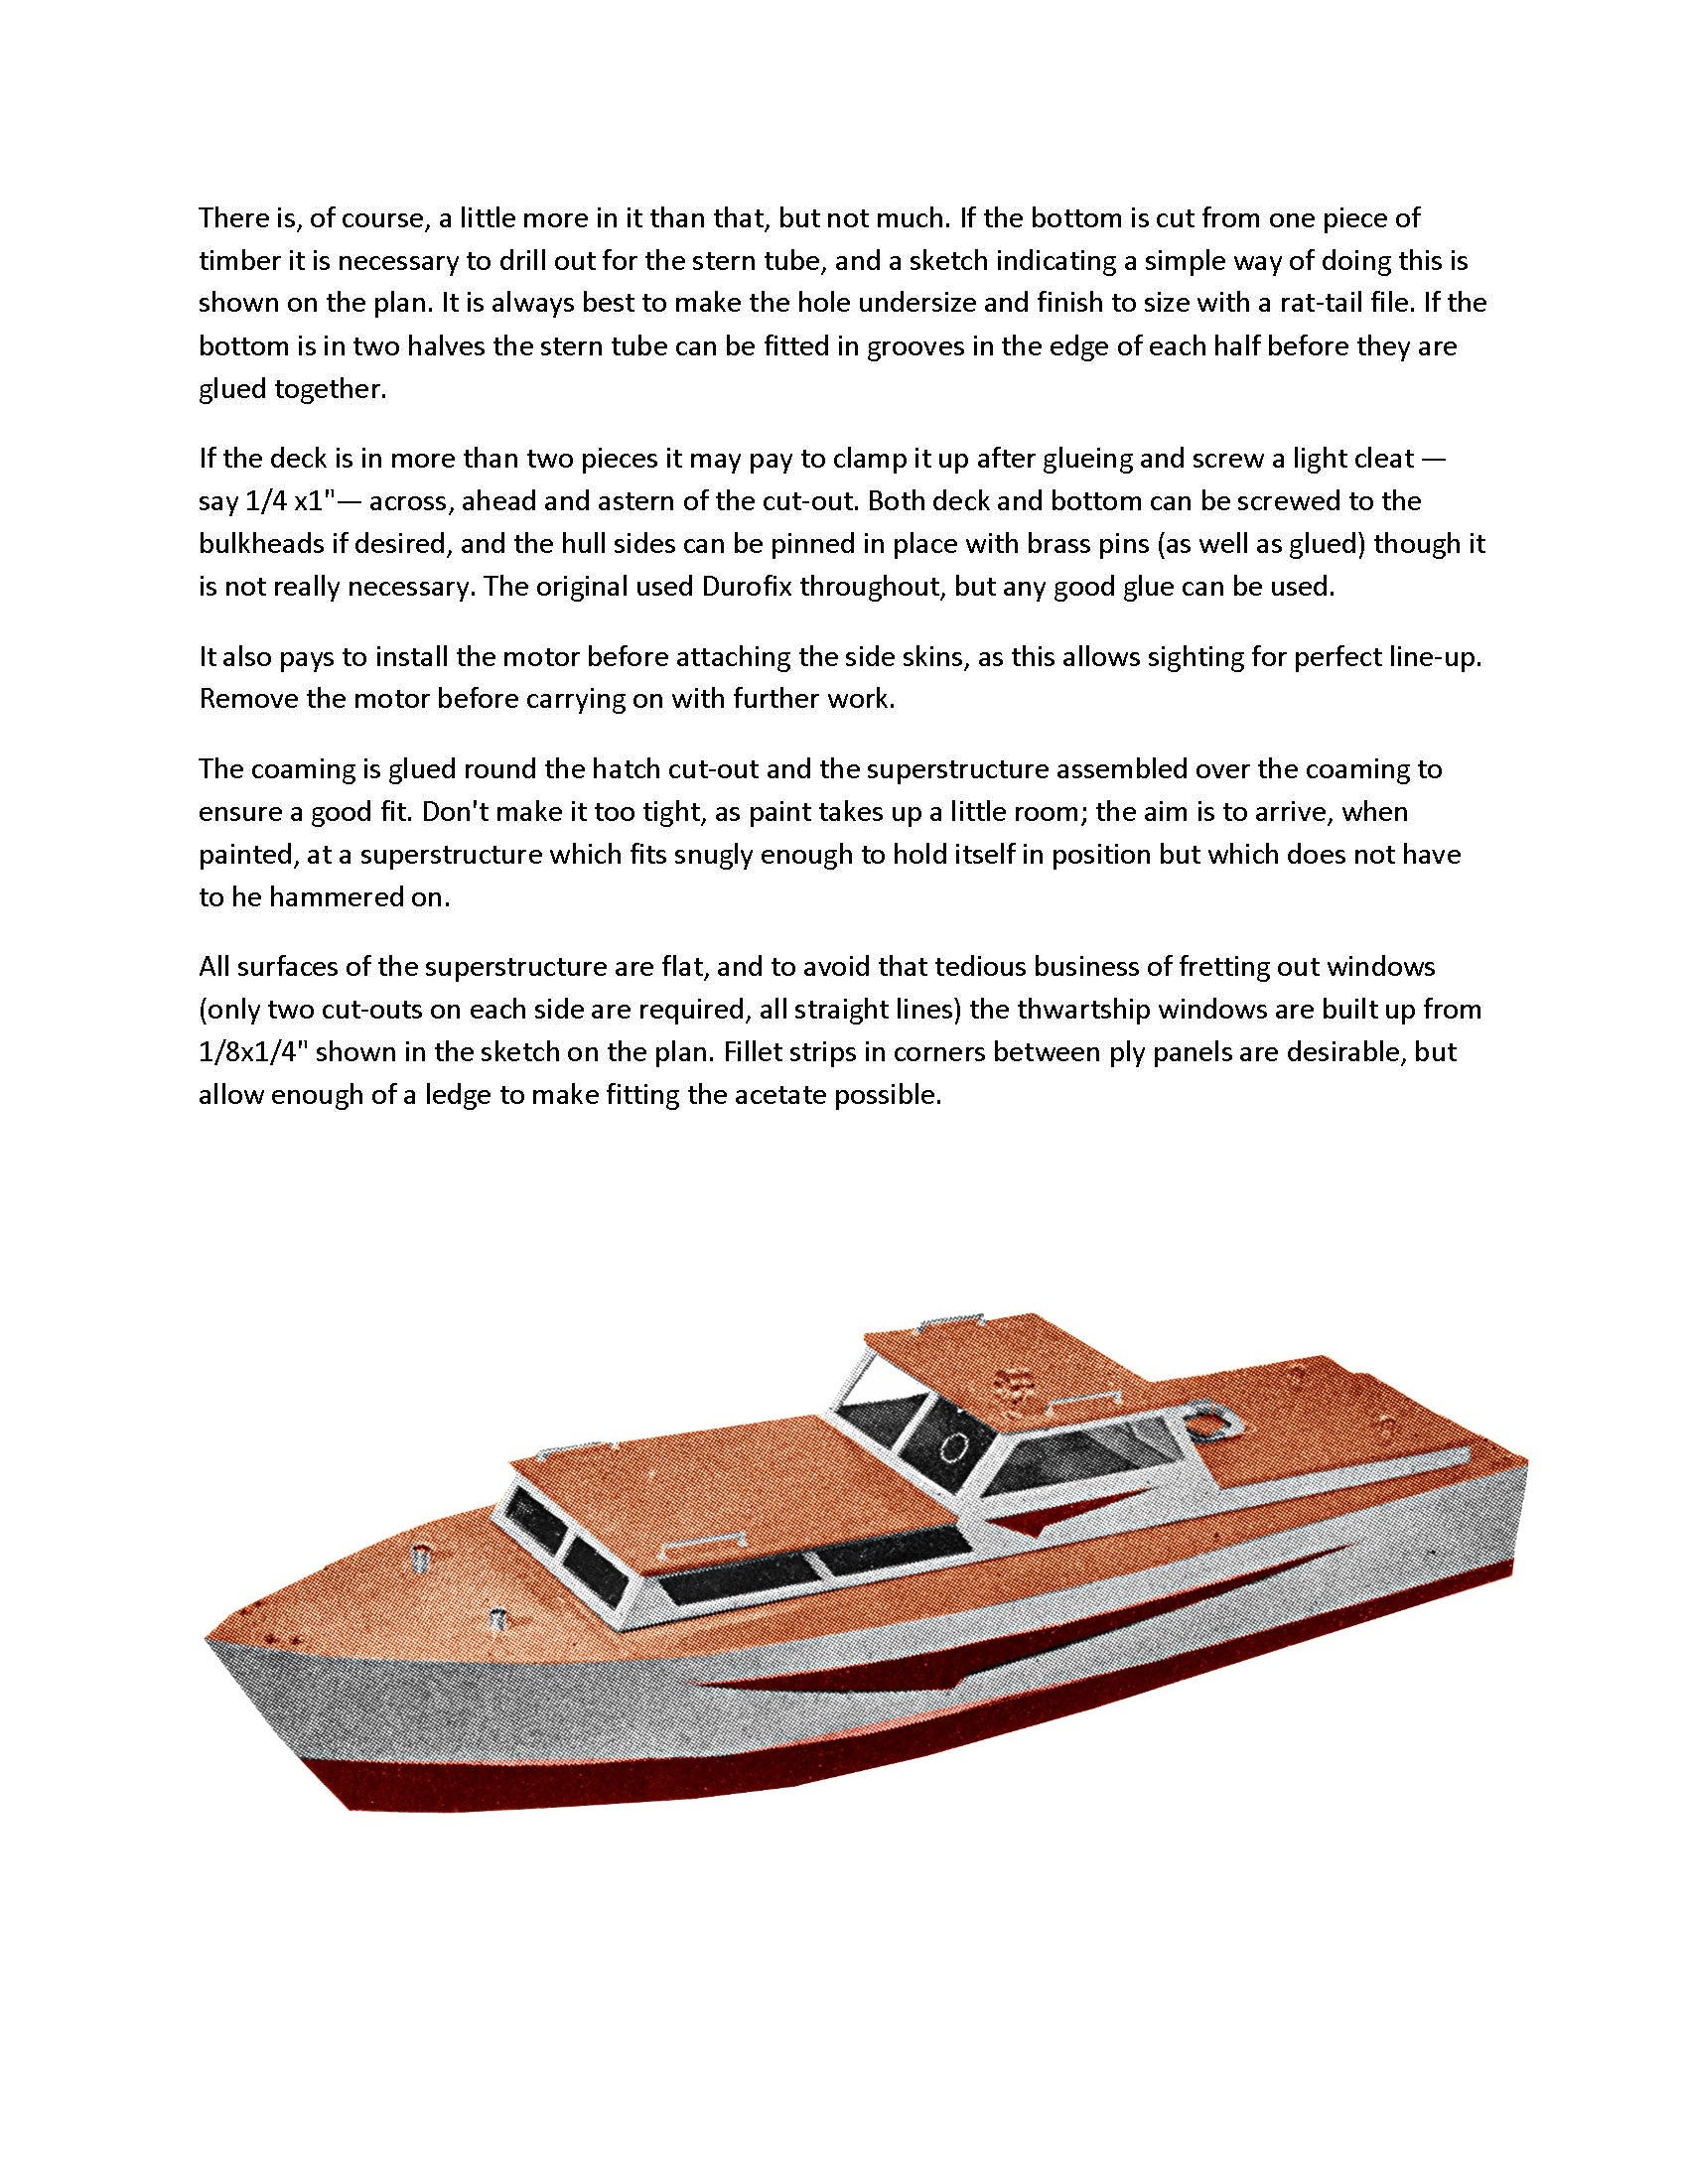 ultra-simple to build 35" cabin cursier for radio control full size printed plan and building article